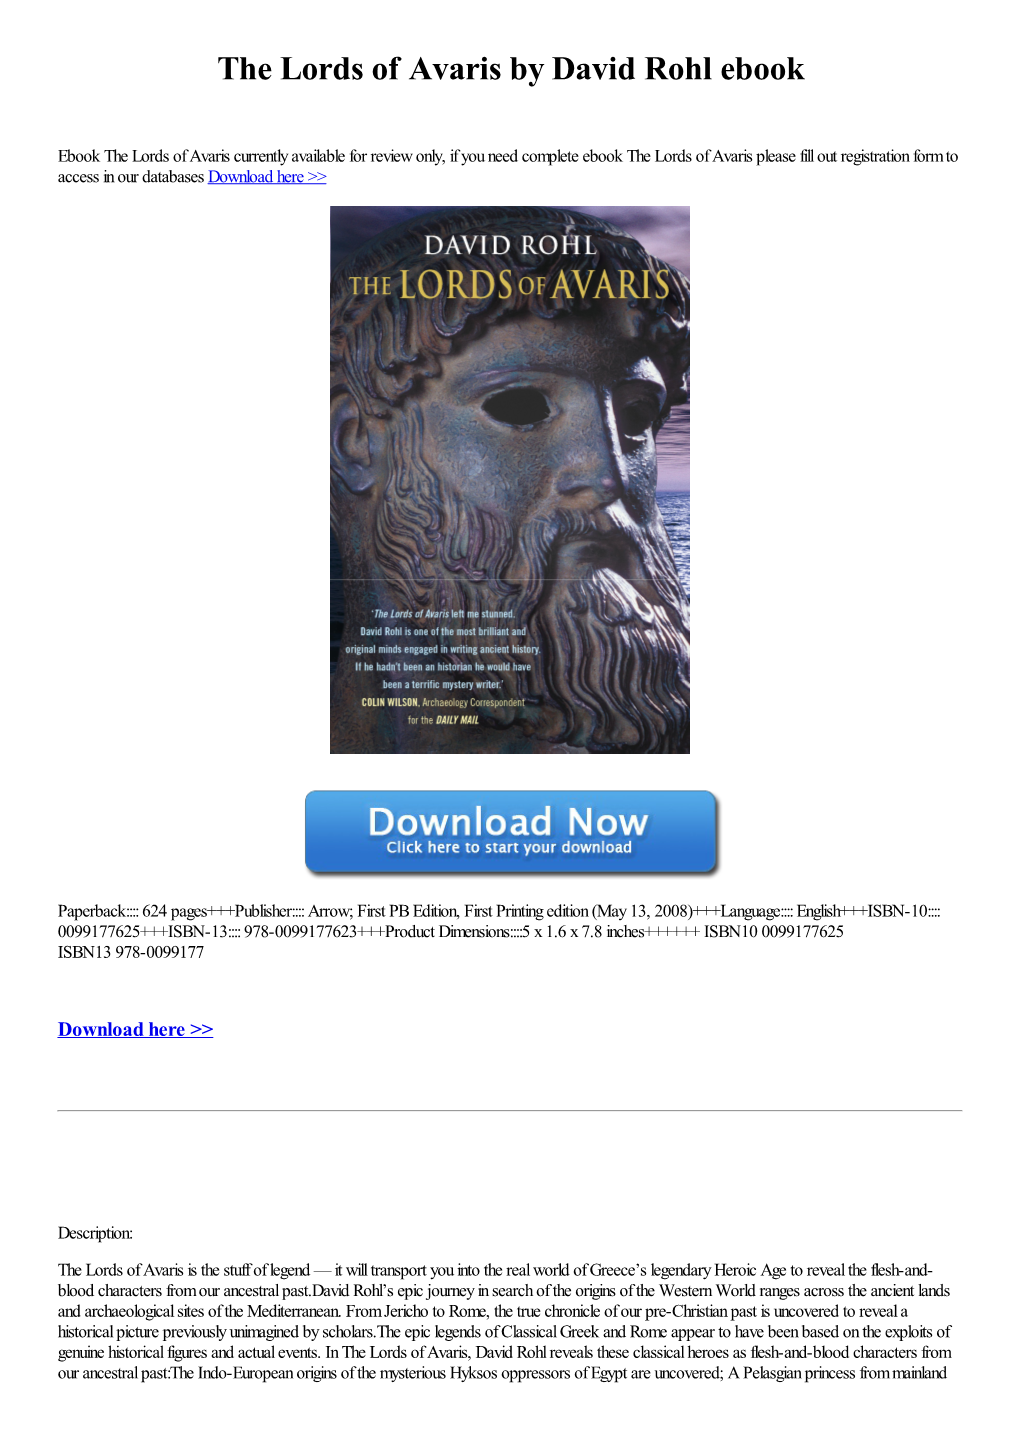 The Lords of Avaris by David Rohl Ebook